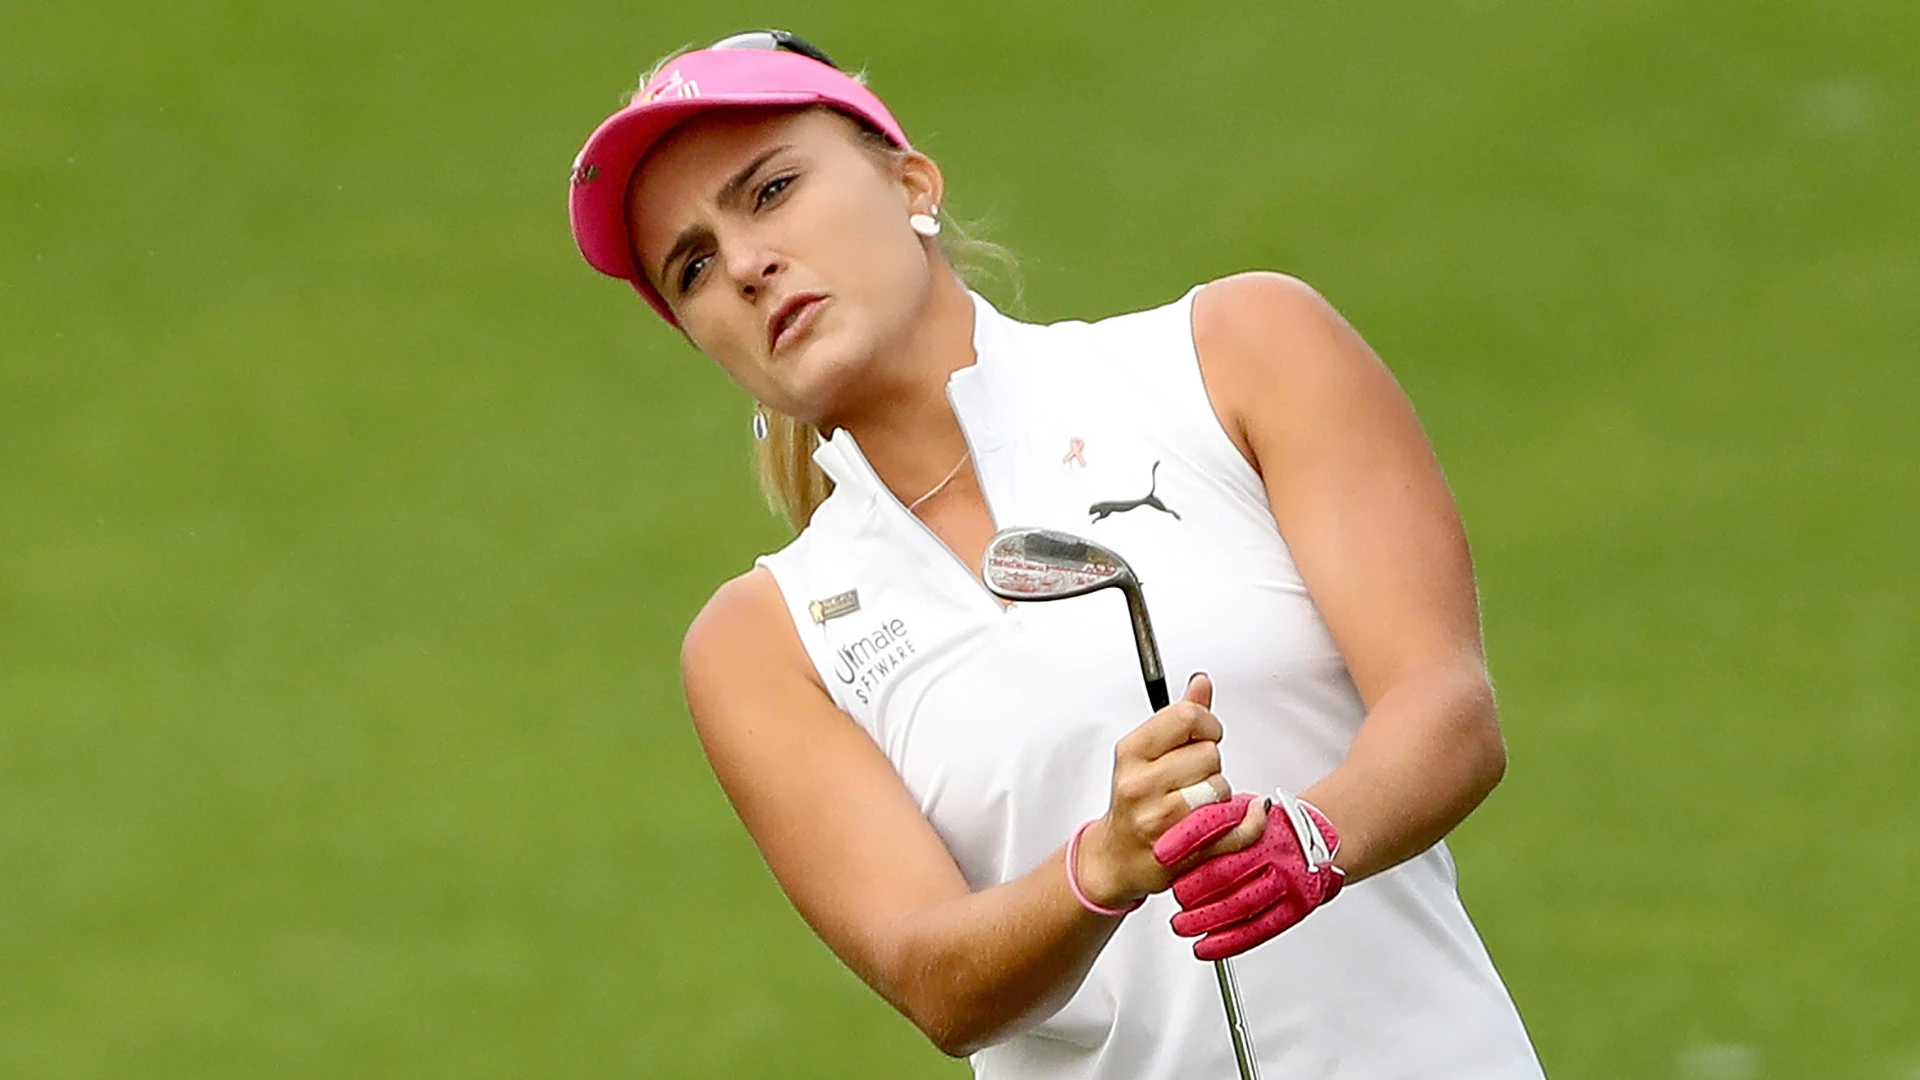 Lexi announces social media break because of 'hurtful' comments